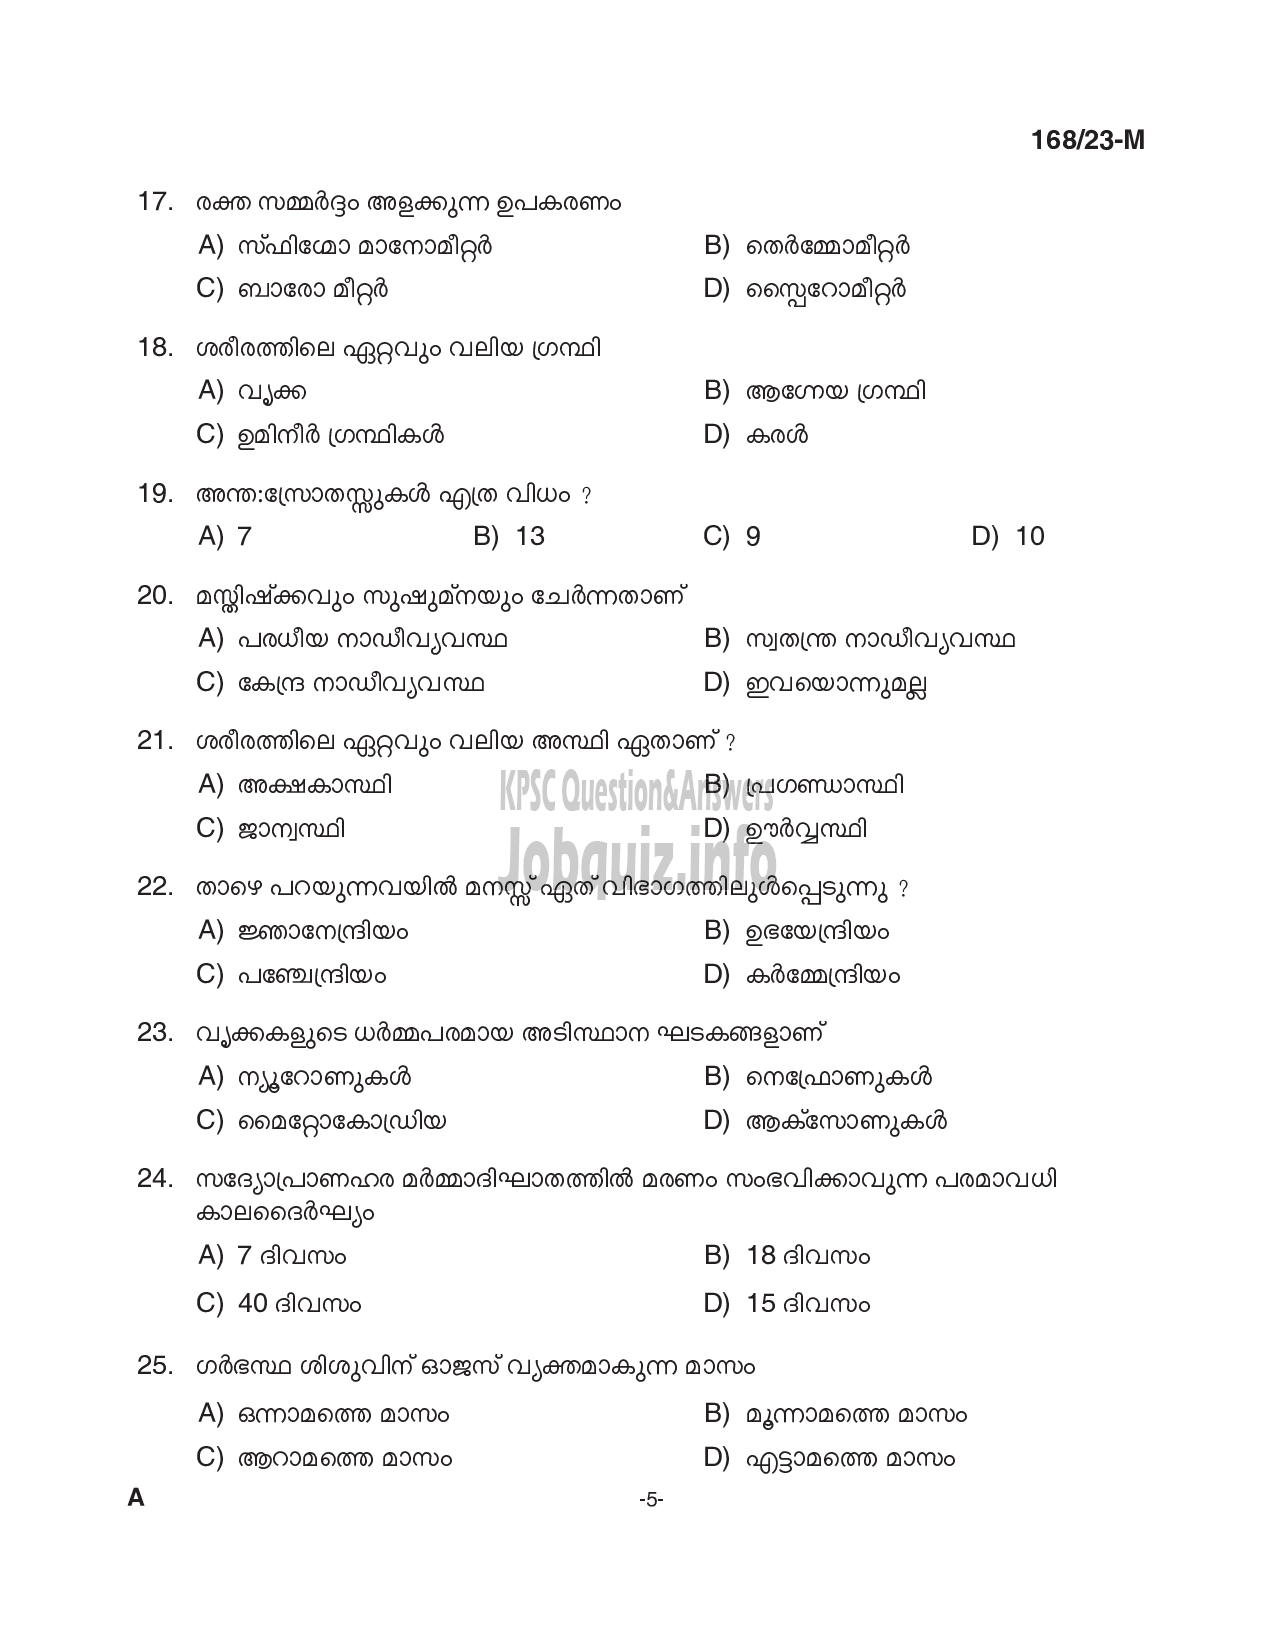 Kerala PSC Question Paper - AYURVEDA THERAPIST(Indian Systems of Medicine,Govt. Ayurveda Colleges) -5